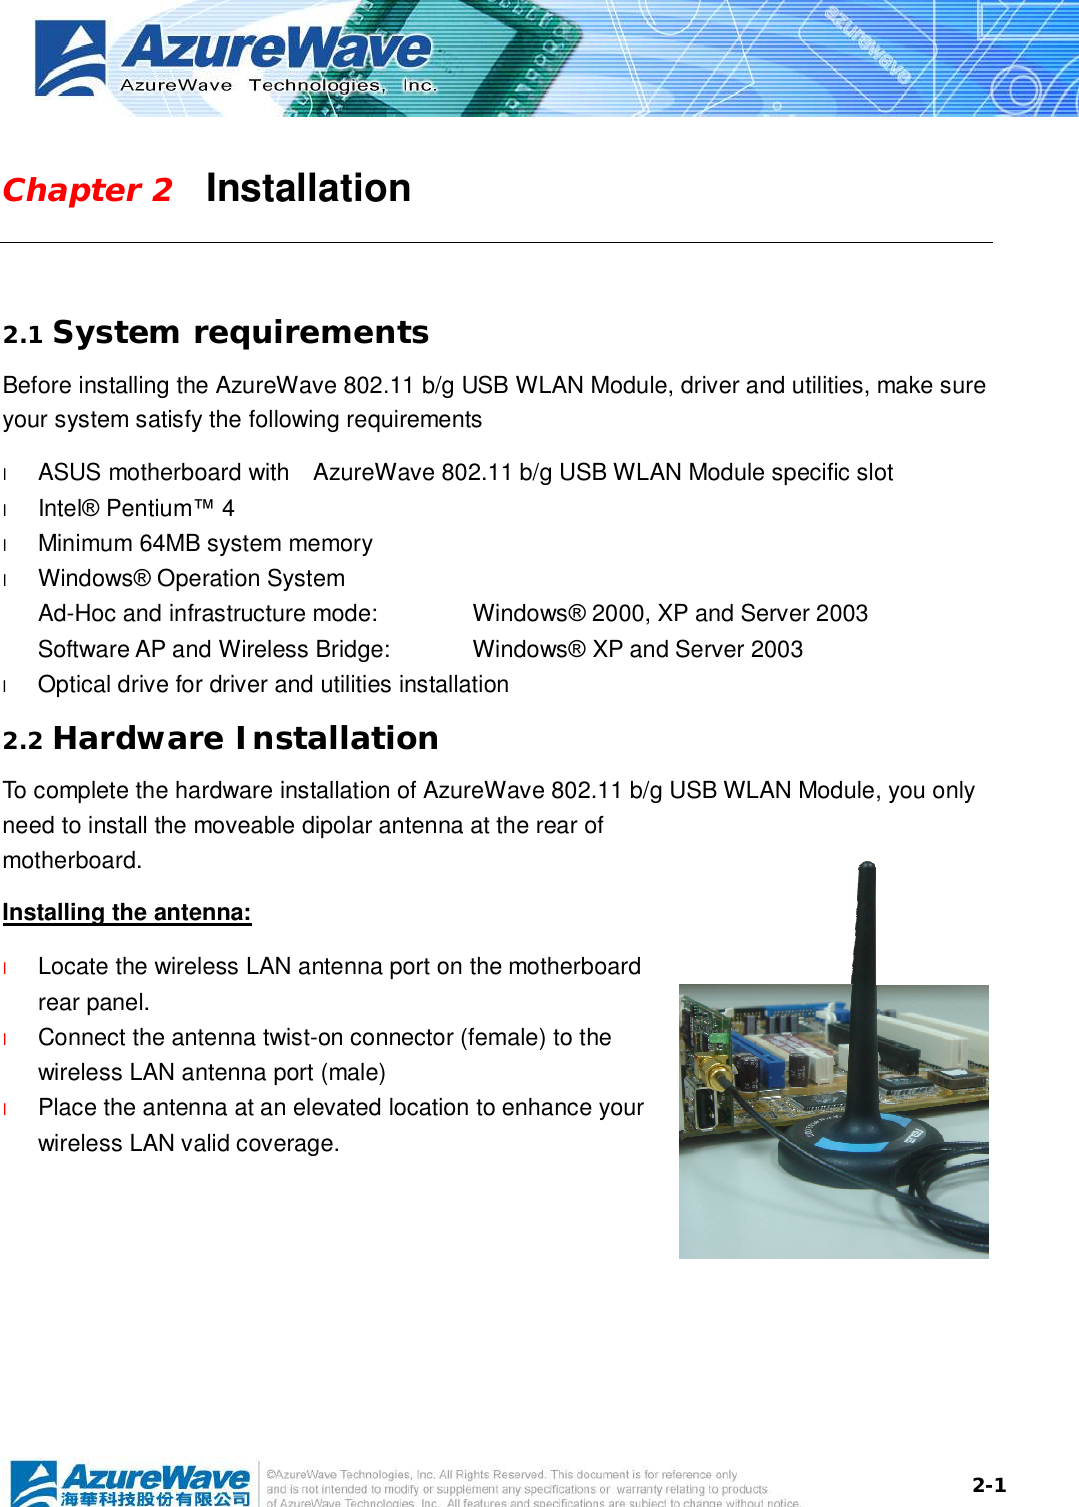  2-1Chapter 2   Installation  2.1 System requirements Before installing the AzureWave 802.11 b/g USB WLAN Module, driver and utilities, make sure your system satisfy the following requirements l  ASUS motherboard with  AzureWave 802.11 b/g USB WLAN Module specific slot l  Intel® Pentium™ 4 l  Minimum 64MB system memory l  Windows® Operation System Ad-Hoc and infrastructure mode:   Windows® 2000, XP and Server 2003 Software AP and Wireless Bridge:  Windows® XP and Server 2003 l  Optical drive for driver and utilities installation 2.2 Hardware Installation To complete the hardware installation of AzureWave 802.11 b/g USB WLAN Module, you only need to install the moveable dipolar antenna at the rear of motherboard. Installing the antenna: l  Locate the wireless LAN antenna port on the motherboard rear panel.  l  Connect the antenna twist-on connector (female) to the wireless LAN antenna port (male) l  Place the antenna at an elevated location to enhance your wireless LAN valid coverage.    